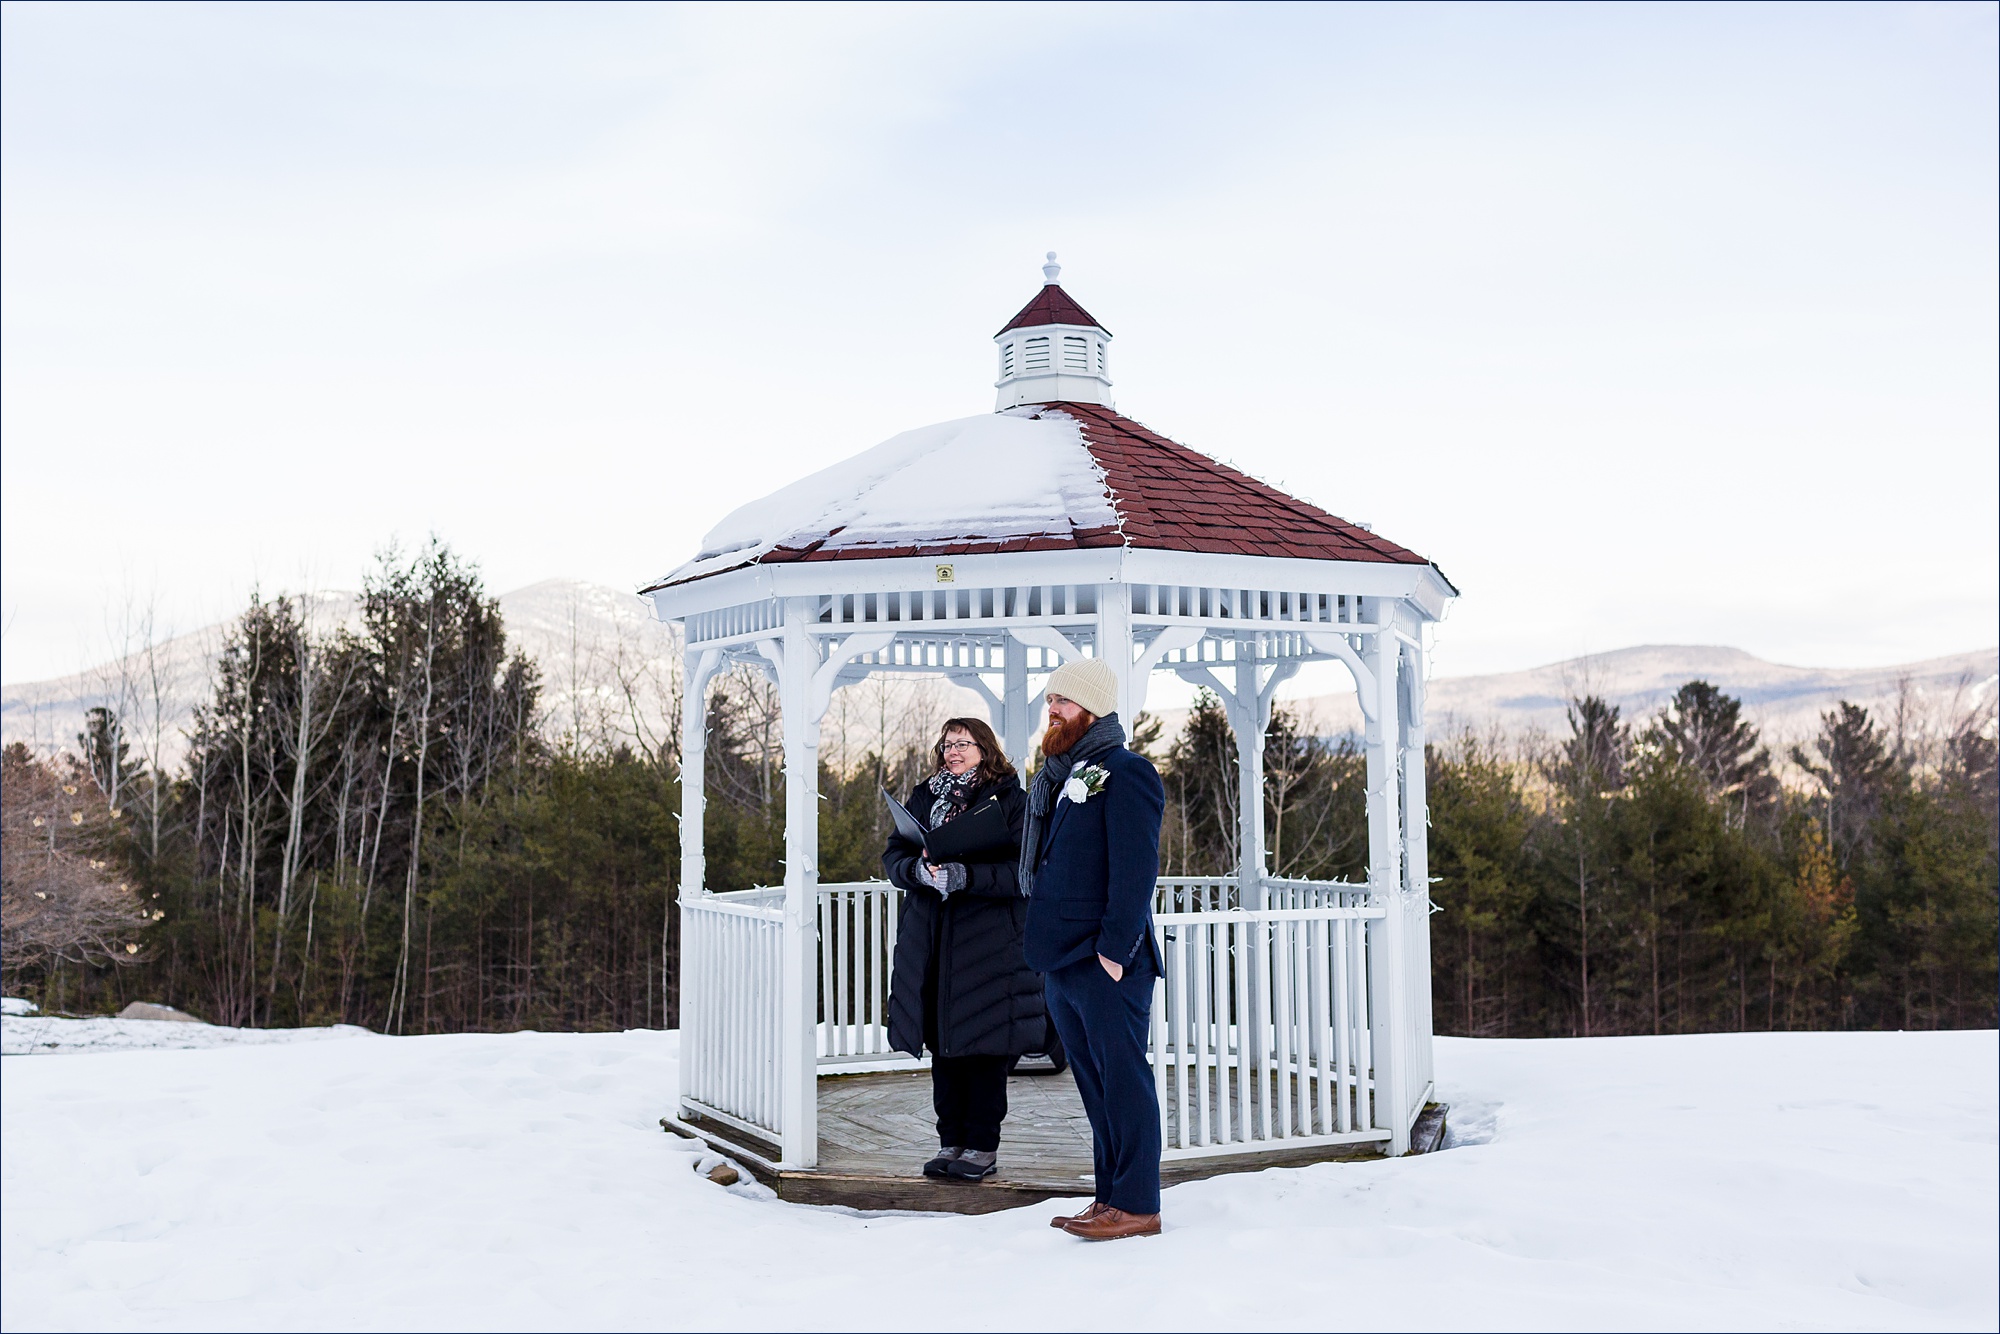 The groom awaits the bride for their outdoor winter elopement in New Hampshire's White Mountains